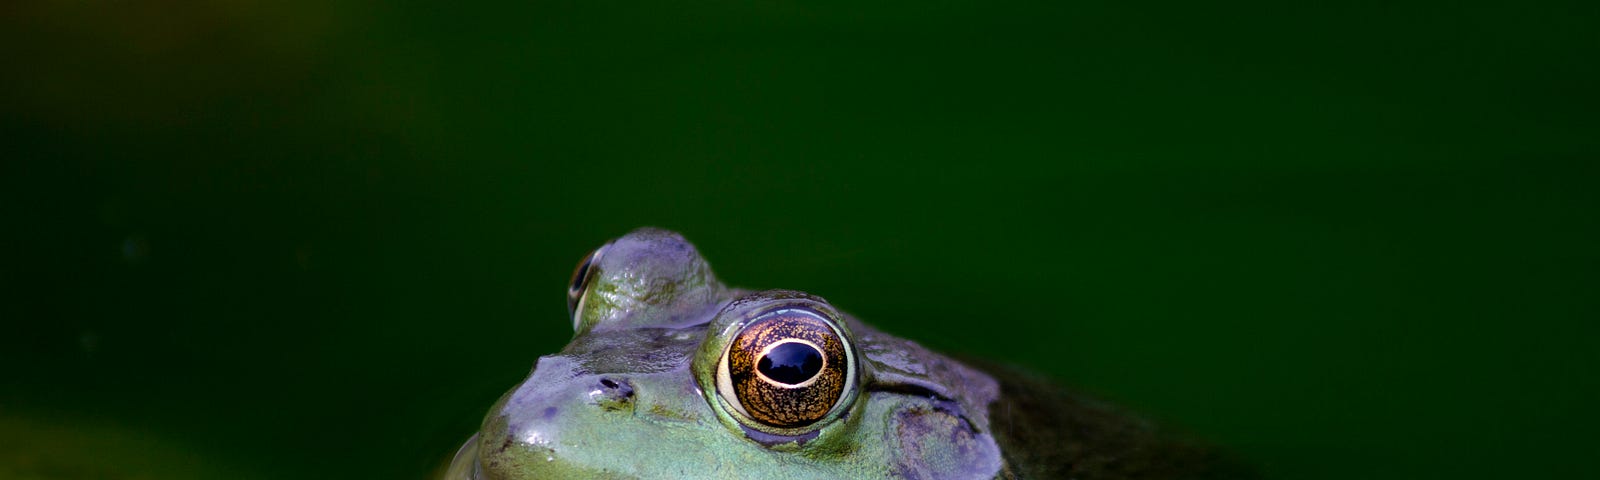 Bullfrog peeking out of water from pond